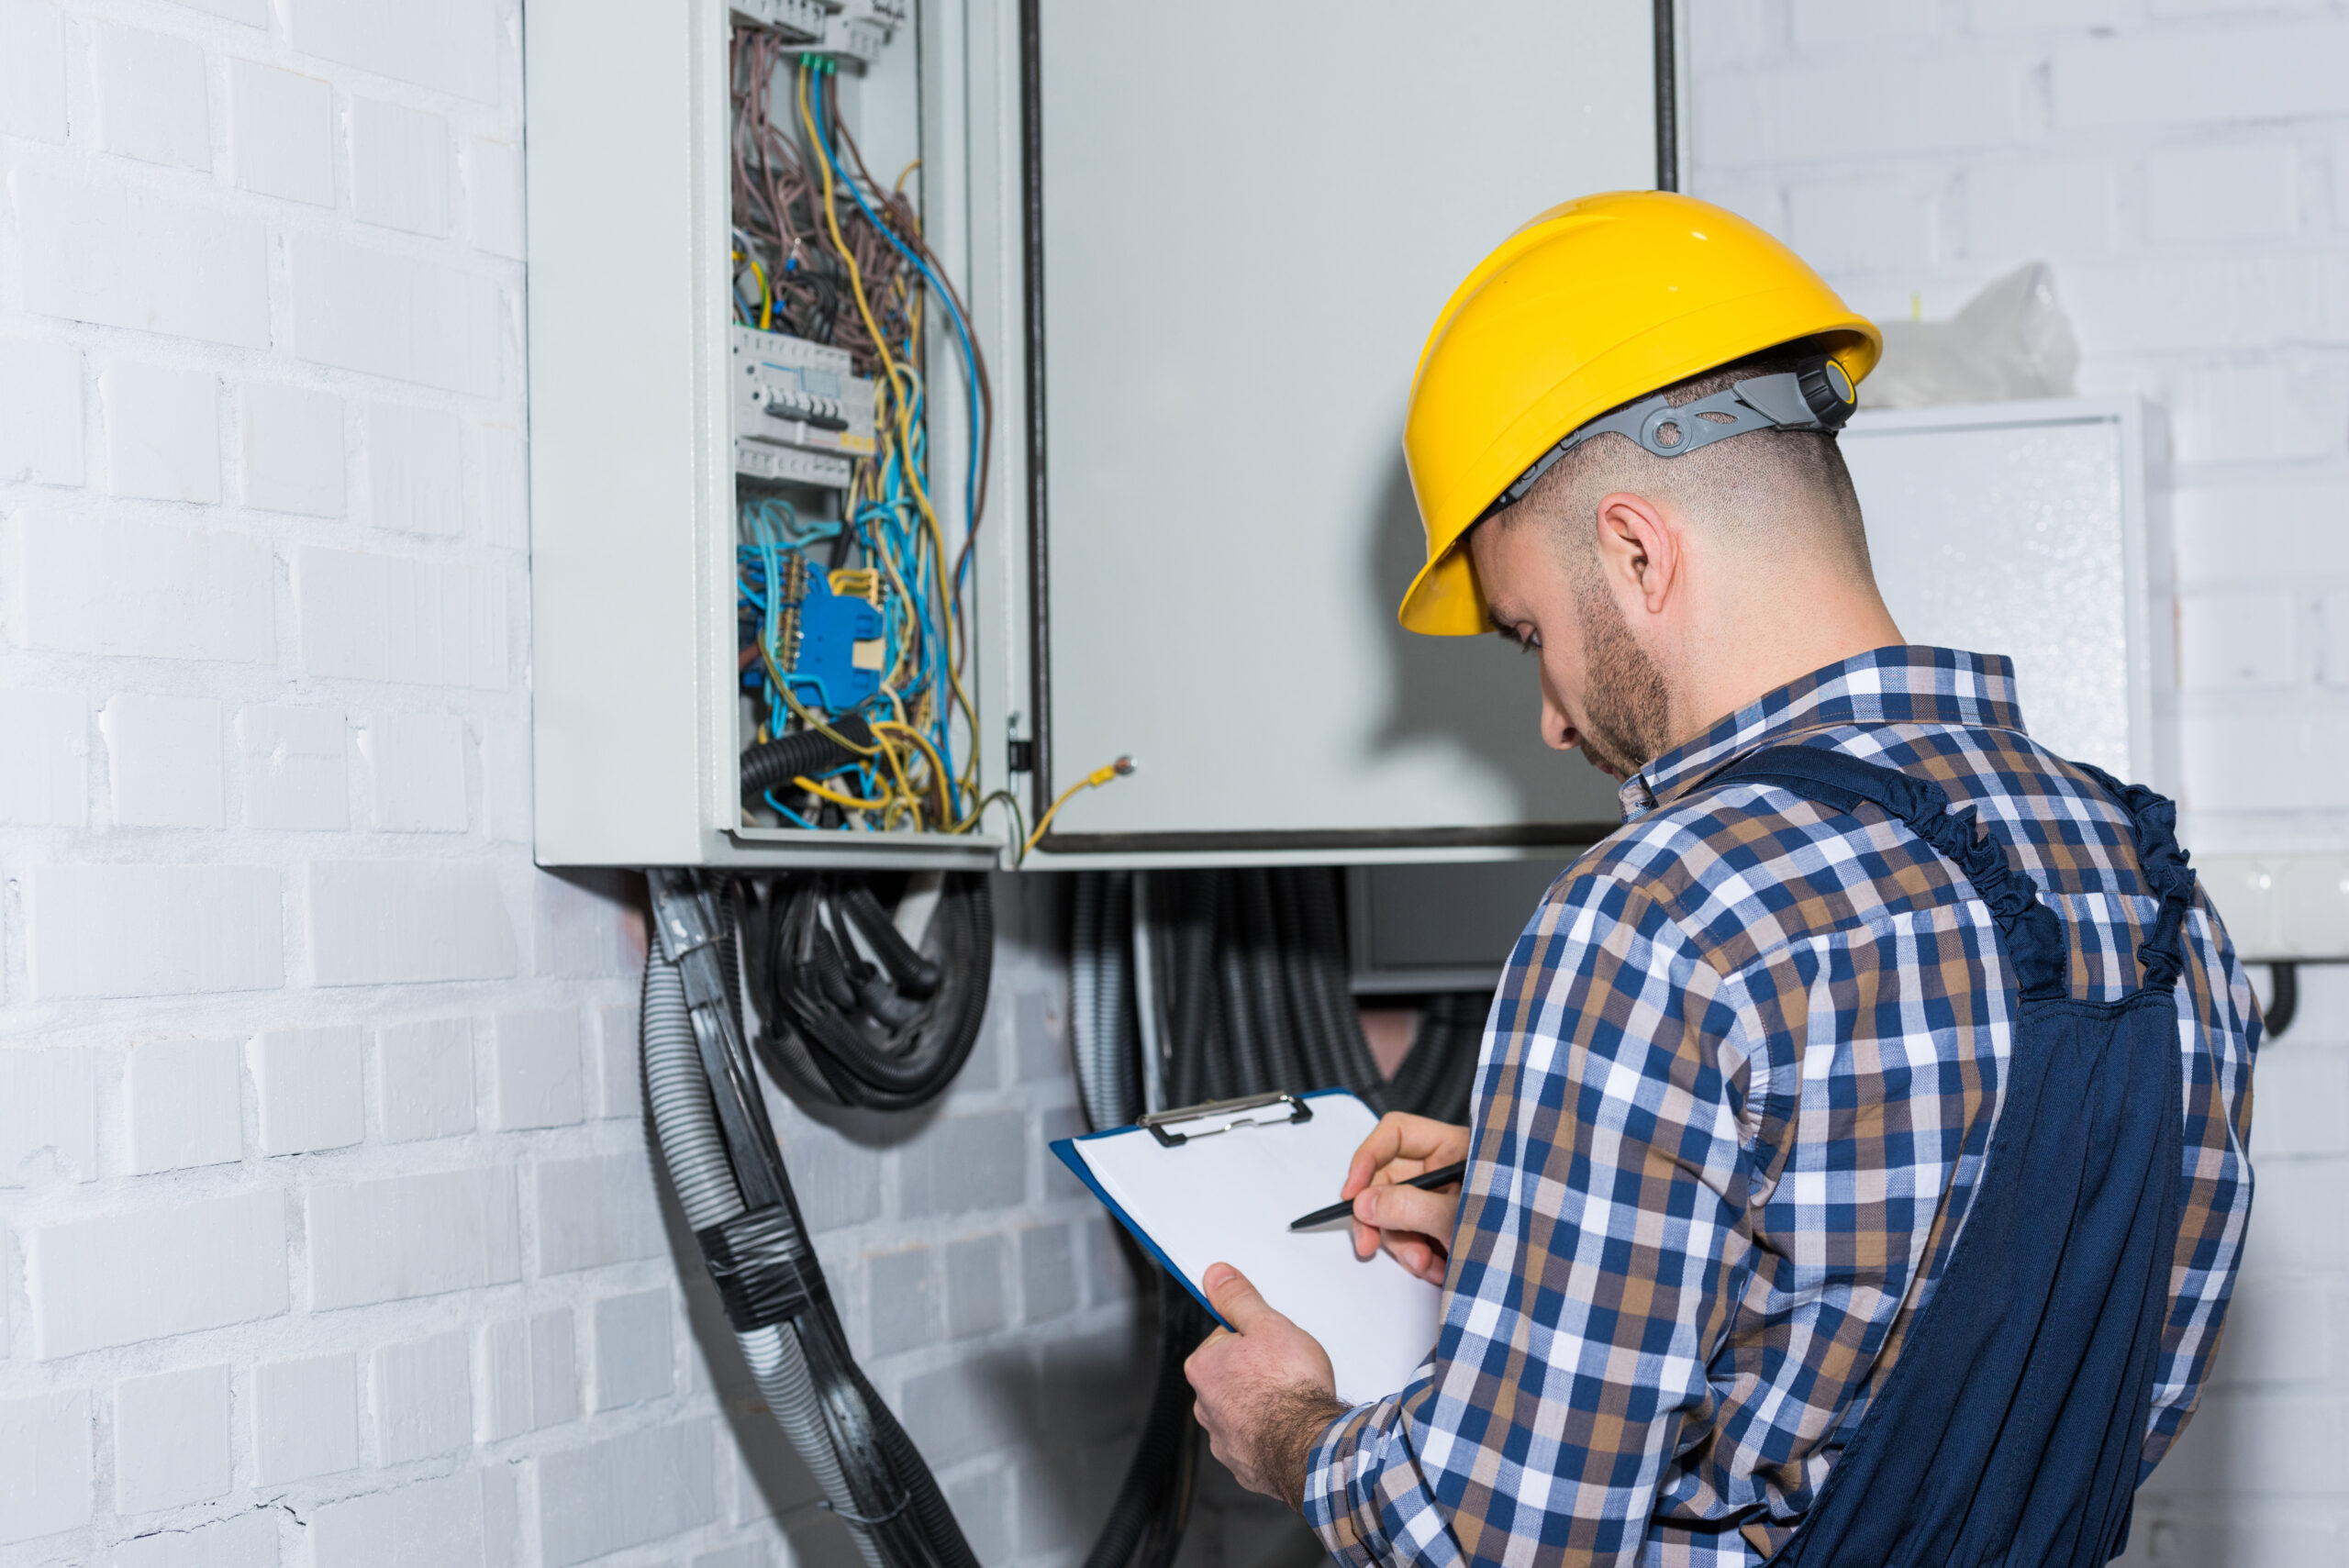 Professional electrician inspecting wires in electrical box